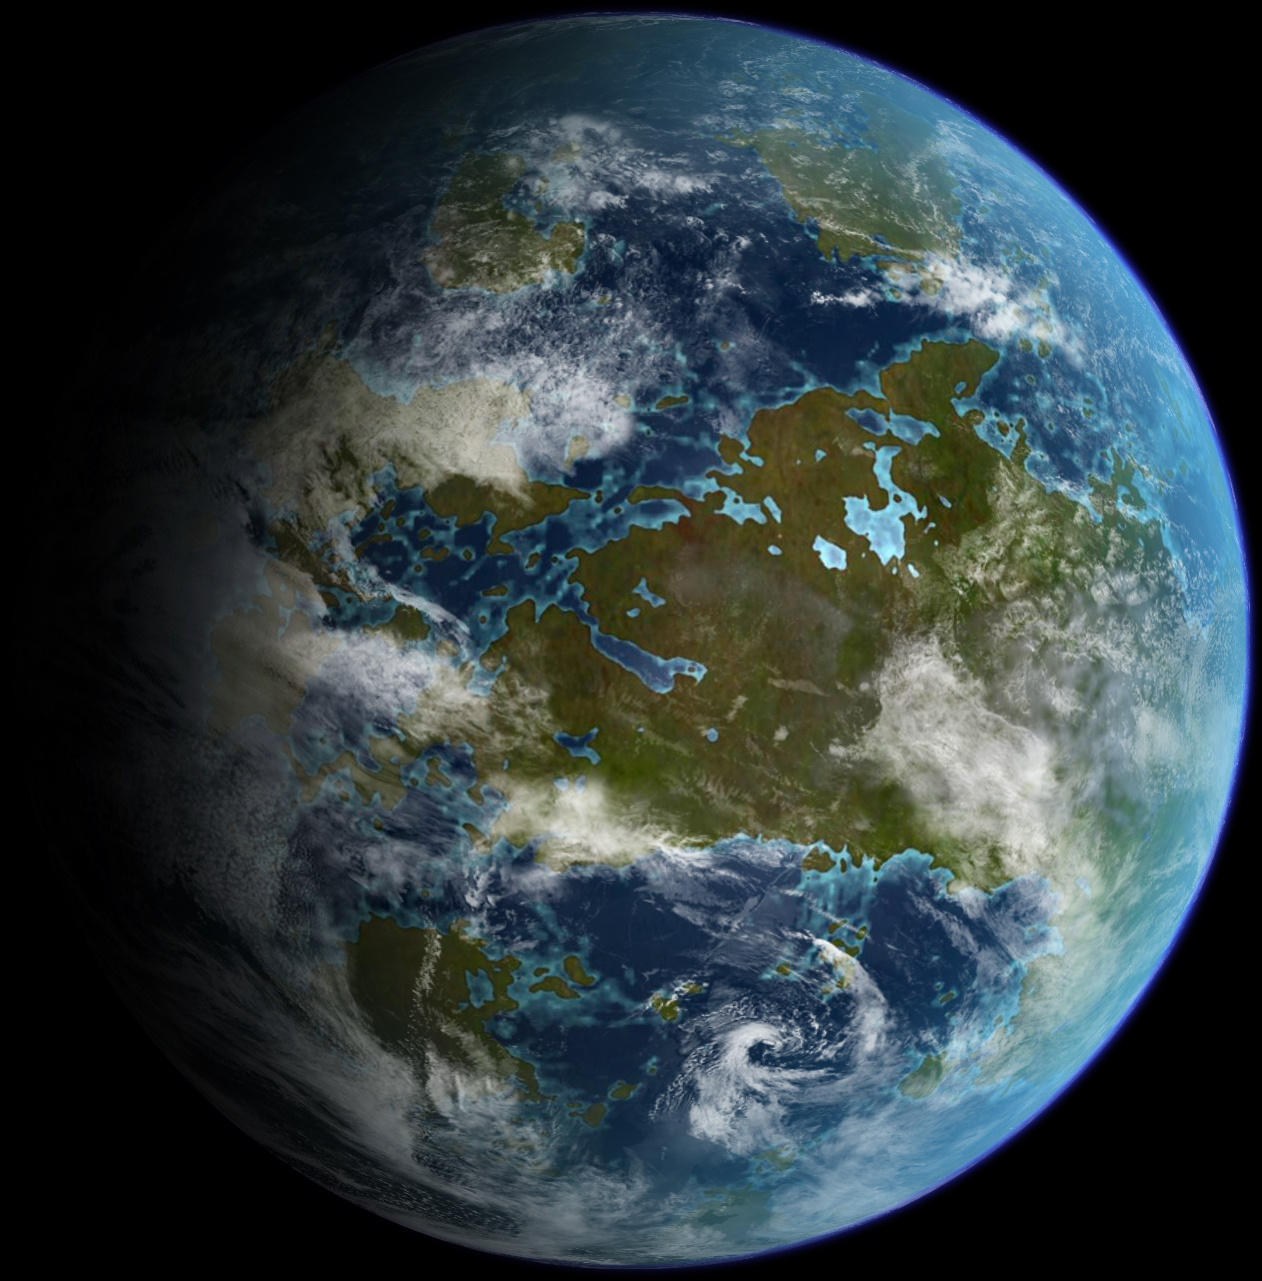 This is what Venus would look like if it was terraformed.